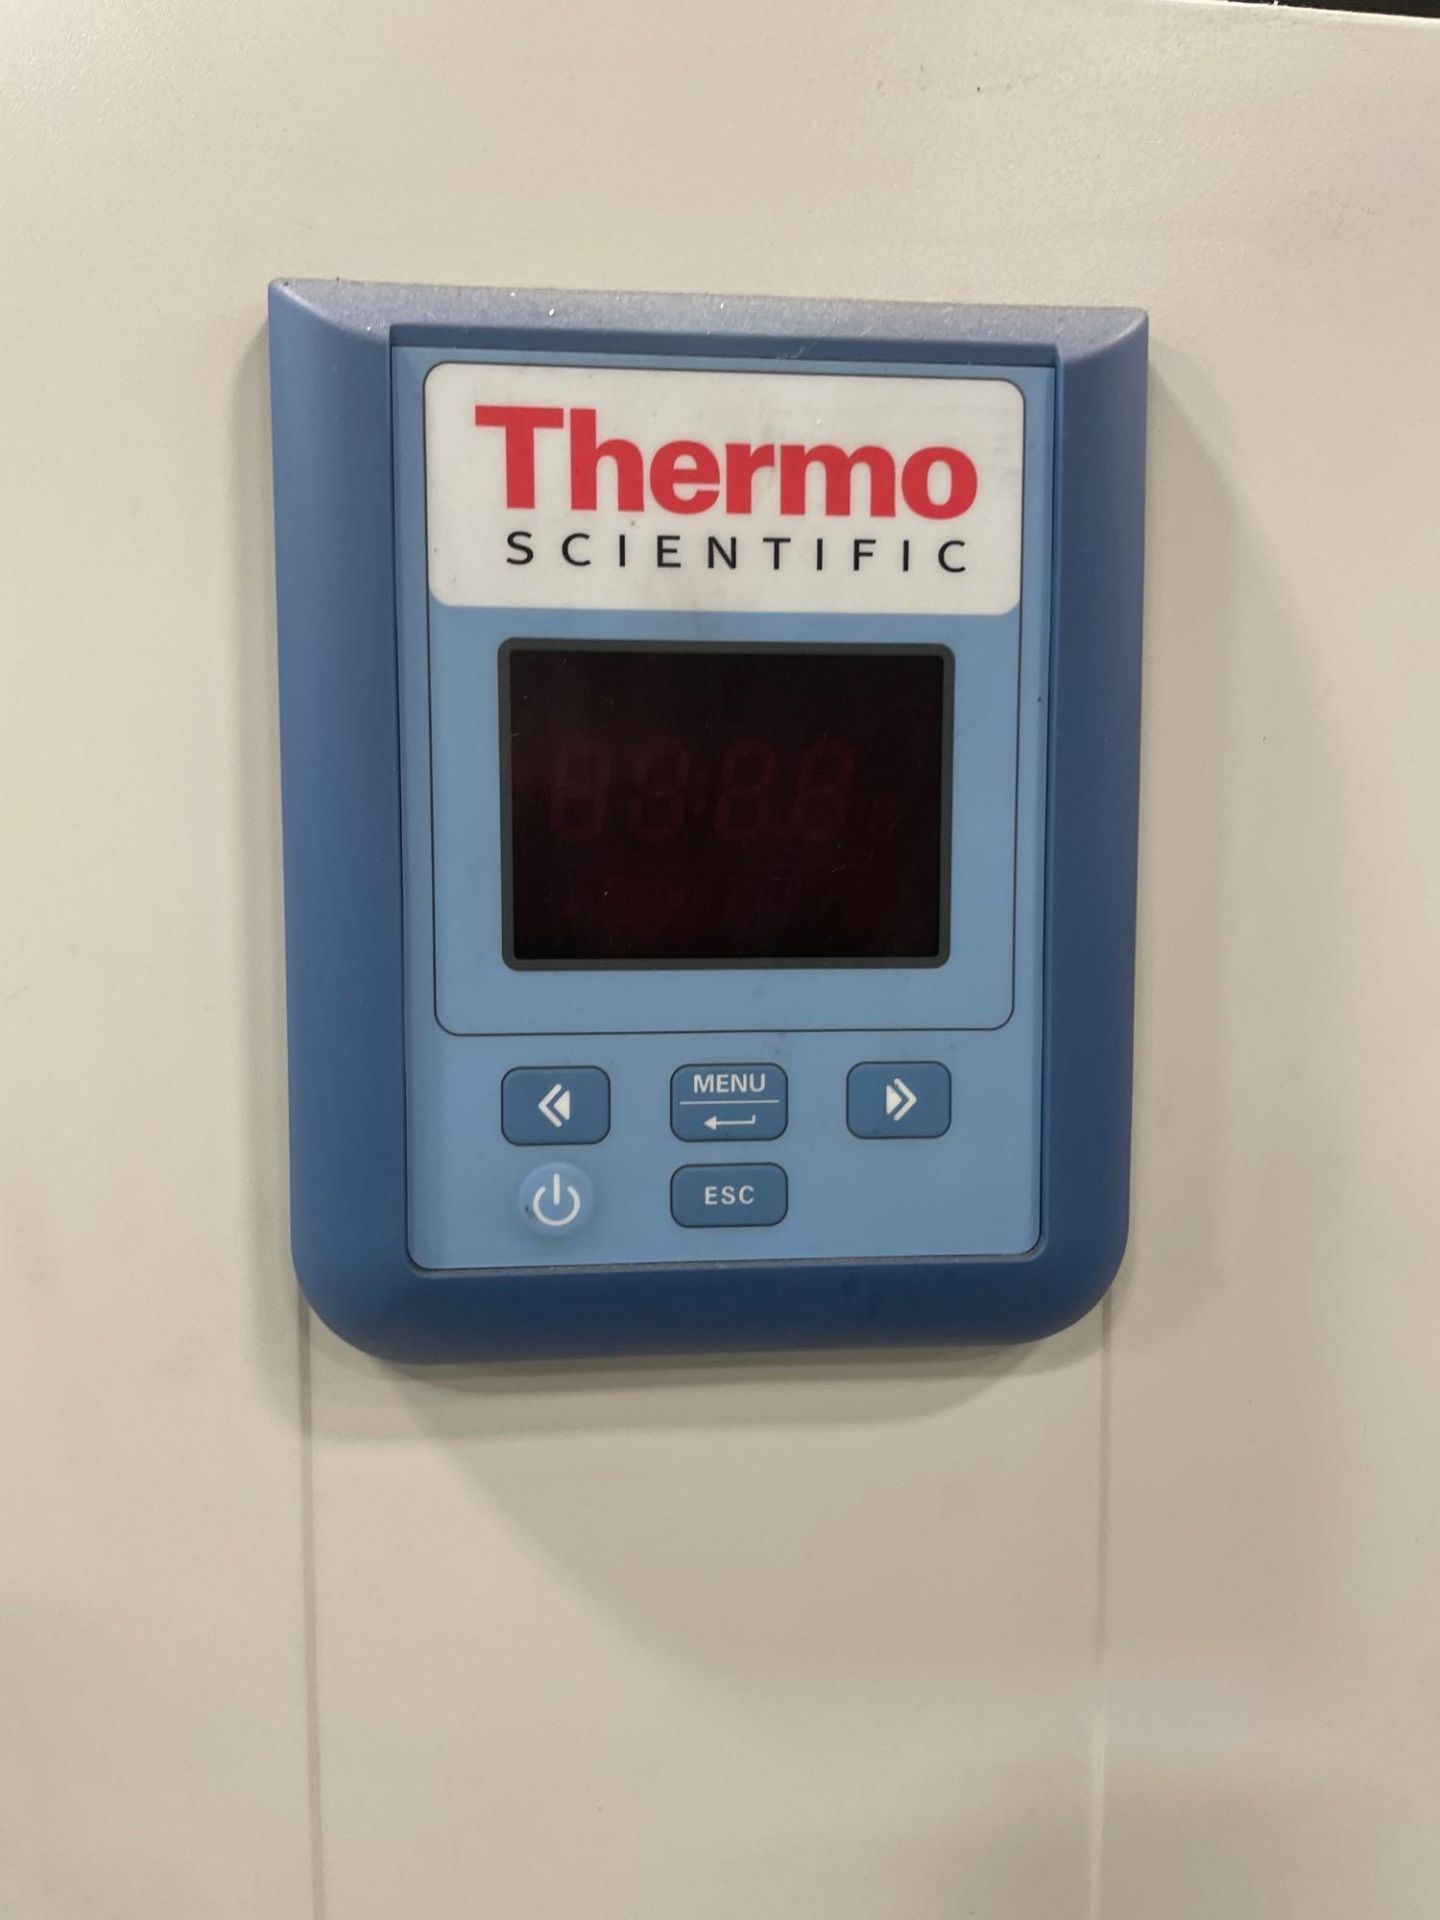 Thermo Scientific Heratherm OGS810 Laboratory Oven, 6.2 Cu. Ft., 250 Deg. C, s/n 42068232, New 2016 - Image 2 of 5